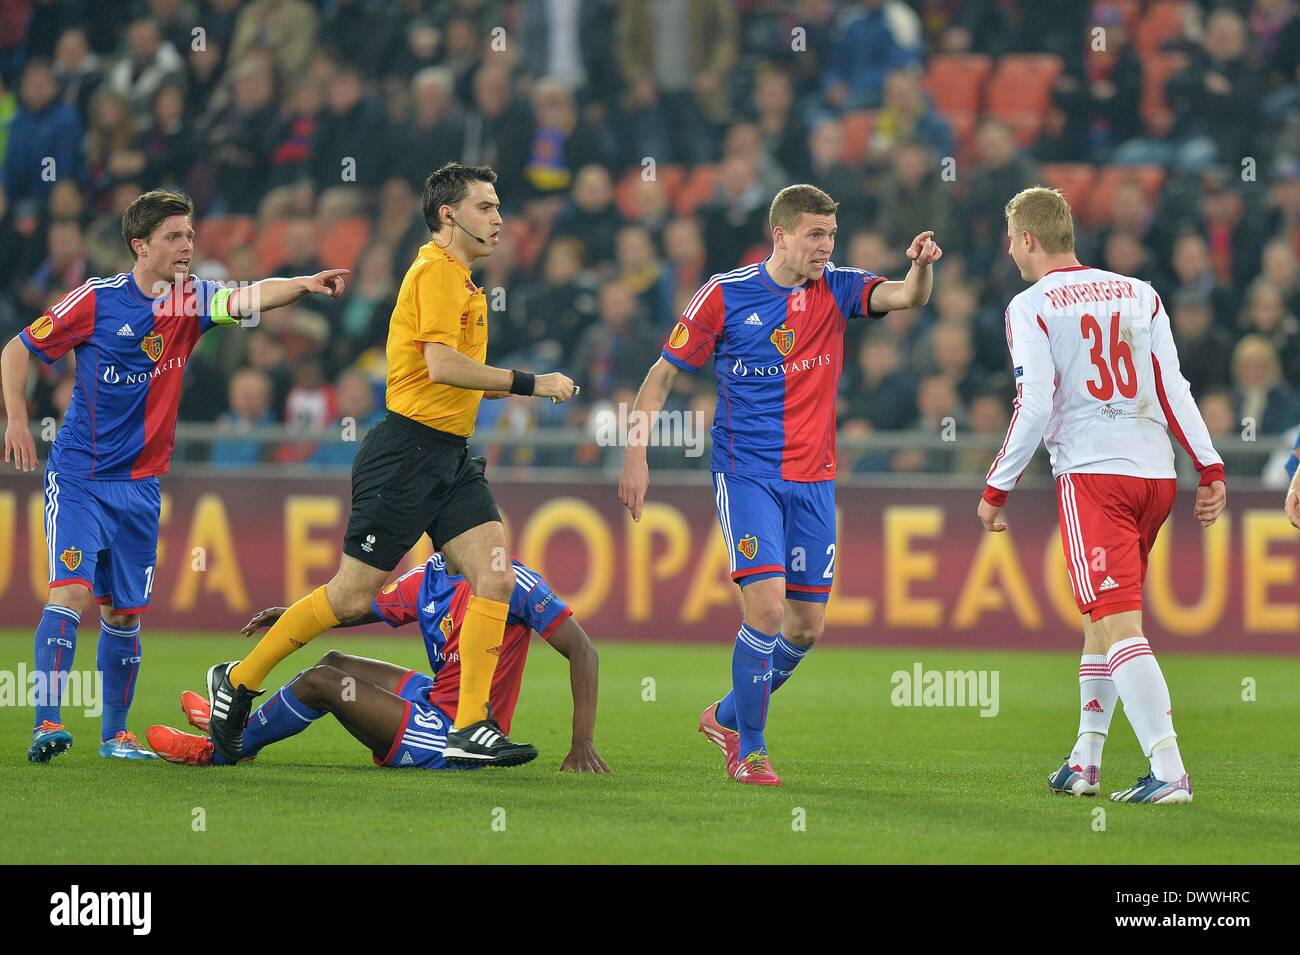 Basel, Switzerland. 13th Mar, 2014. Europa League football. FC Basel versus  Red Bull Salzburg. Basel's Valentin Stocker and Fabian Frei challenge Martin  Hinteregger about the foul as the ref steps in Credit: